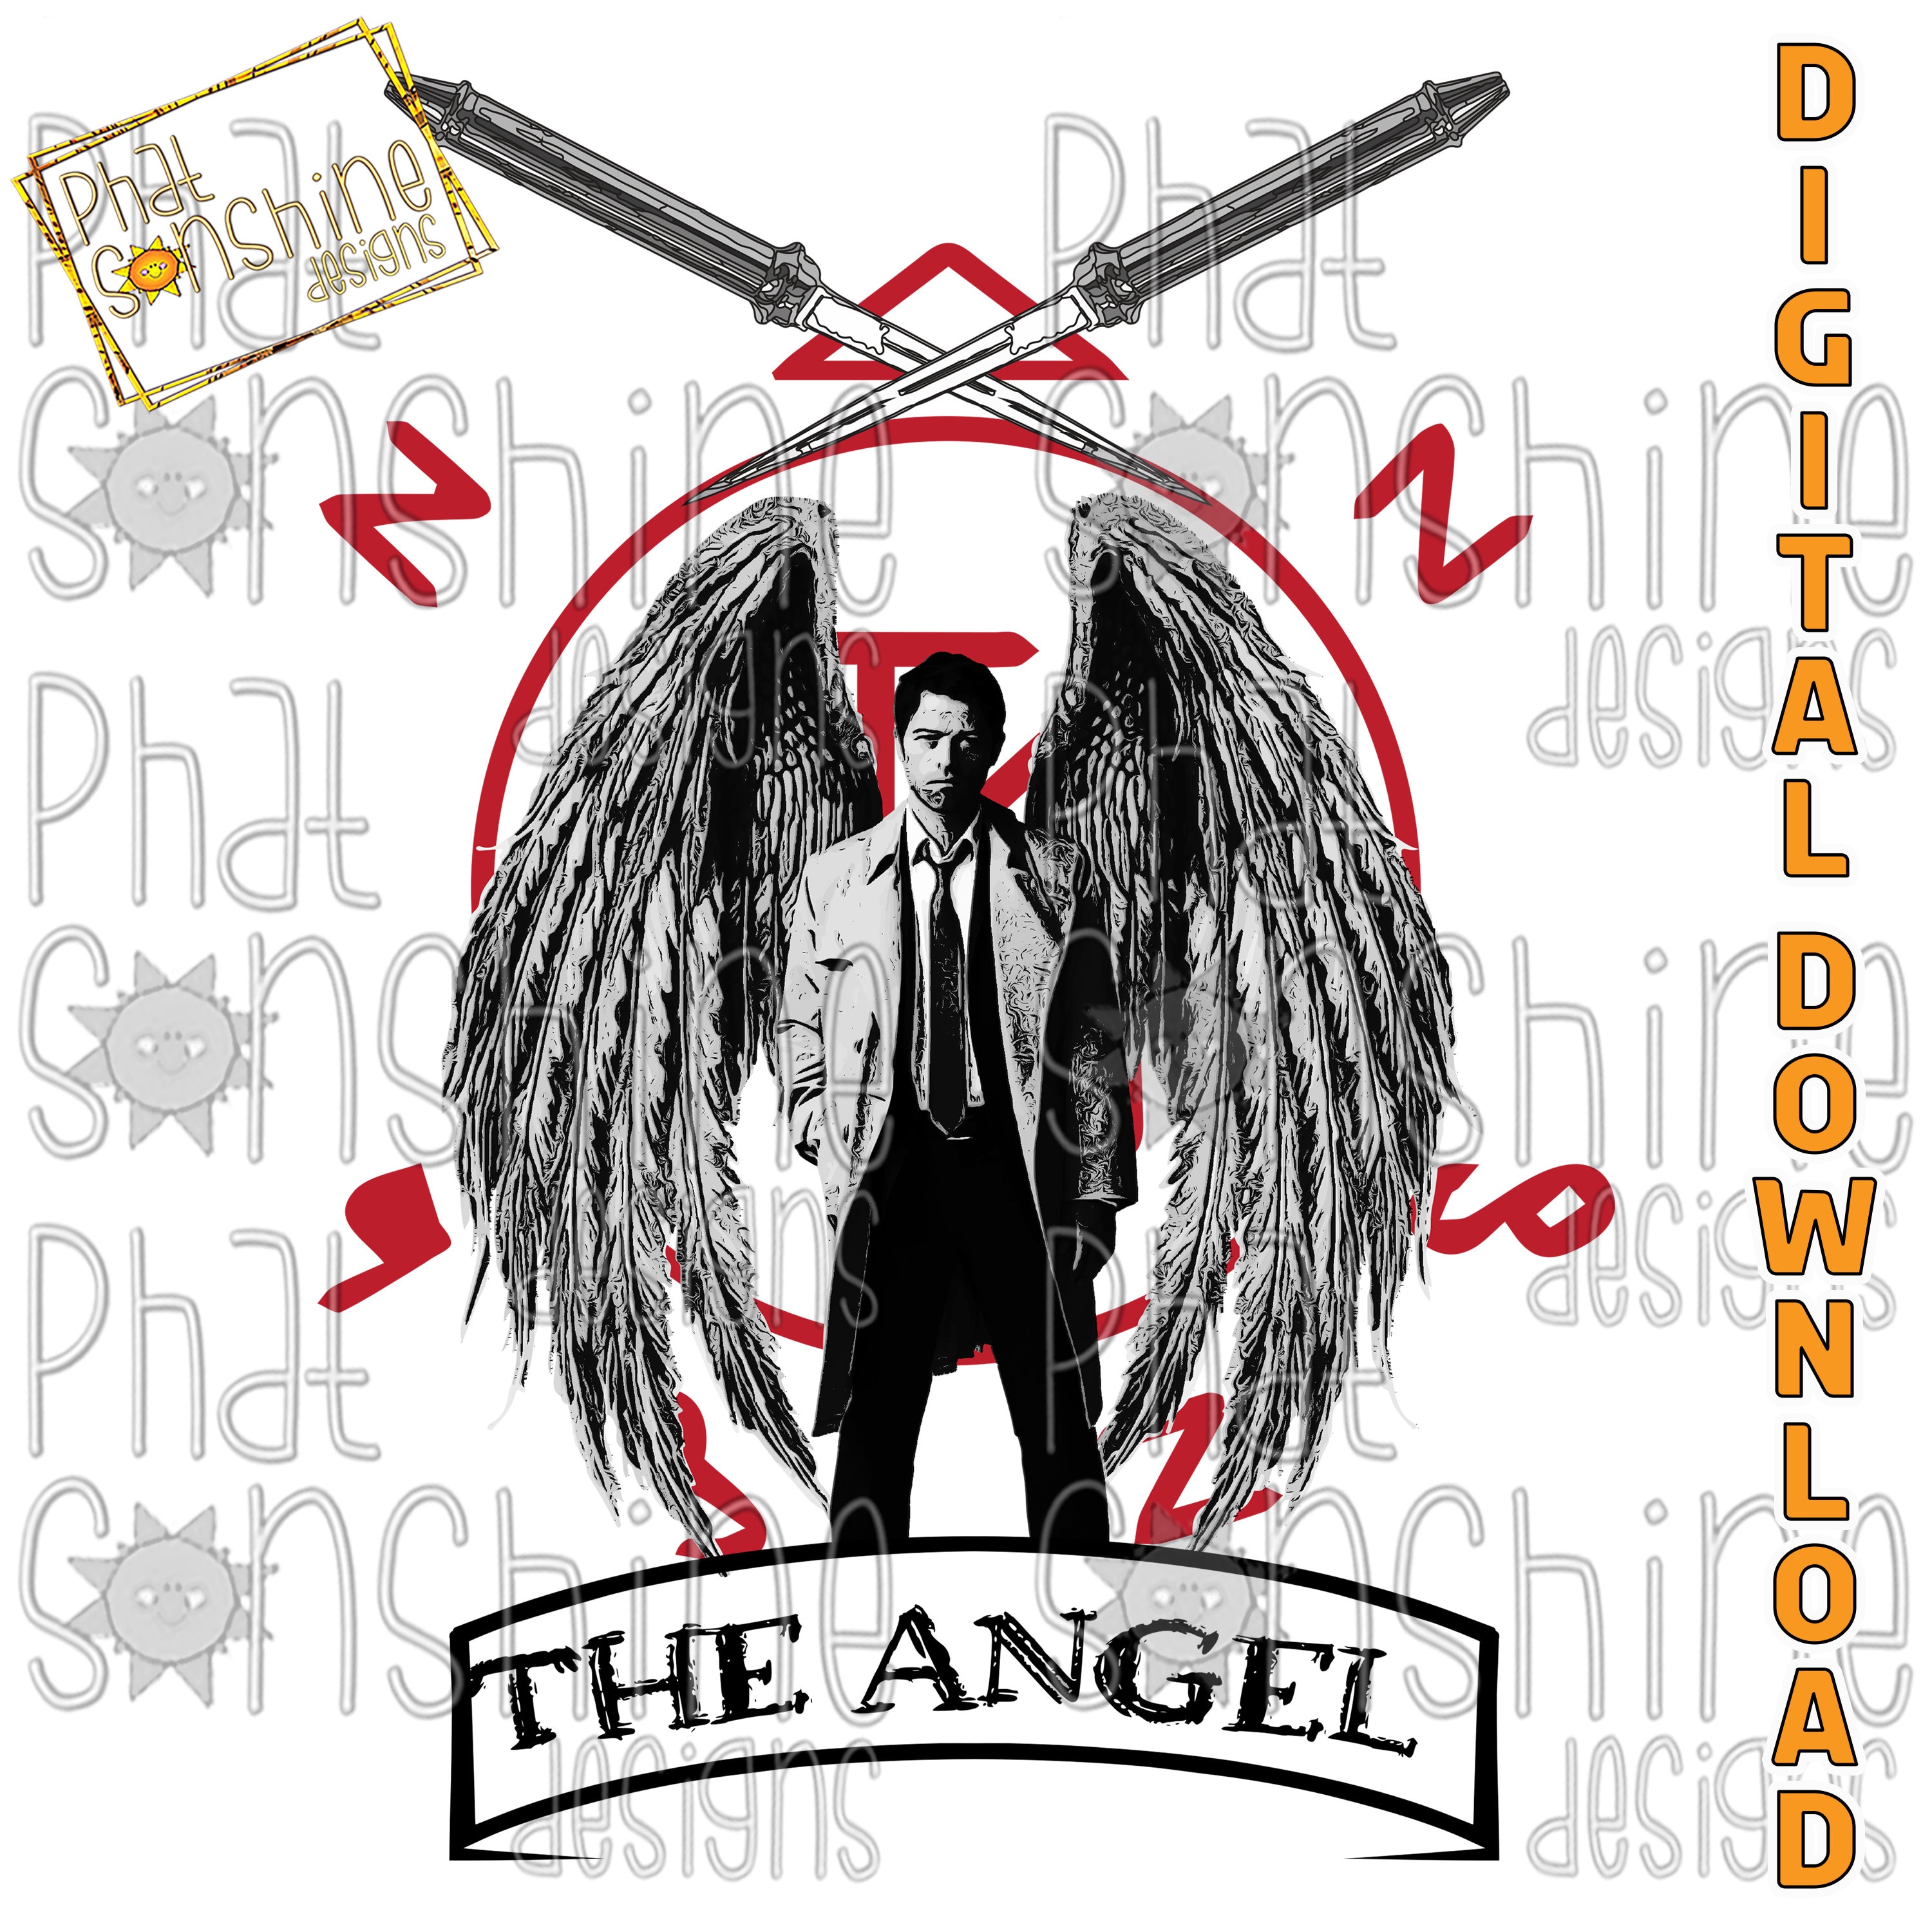 castiel actor Decoration Art Poster Wall Art Personalized Gift Modern